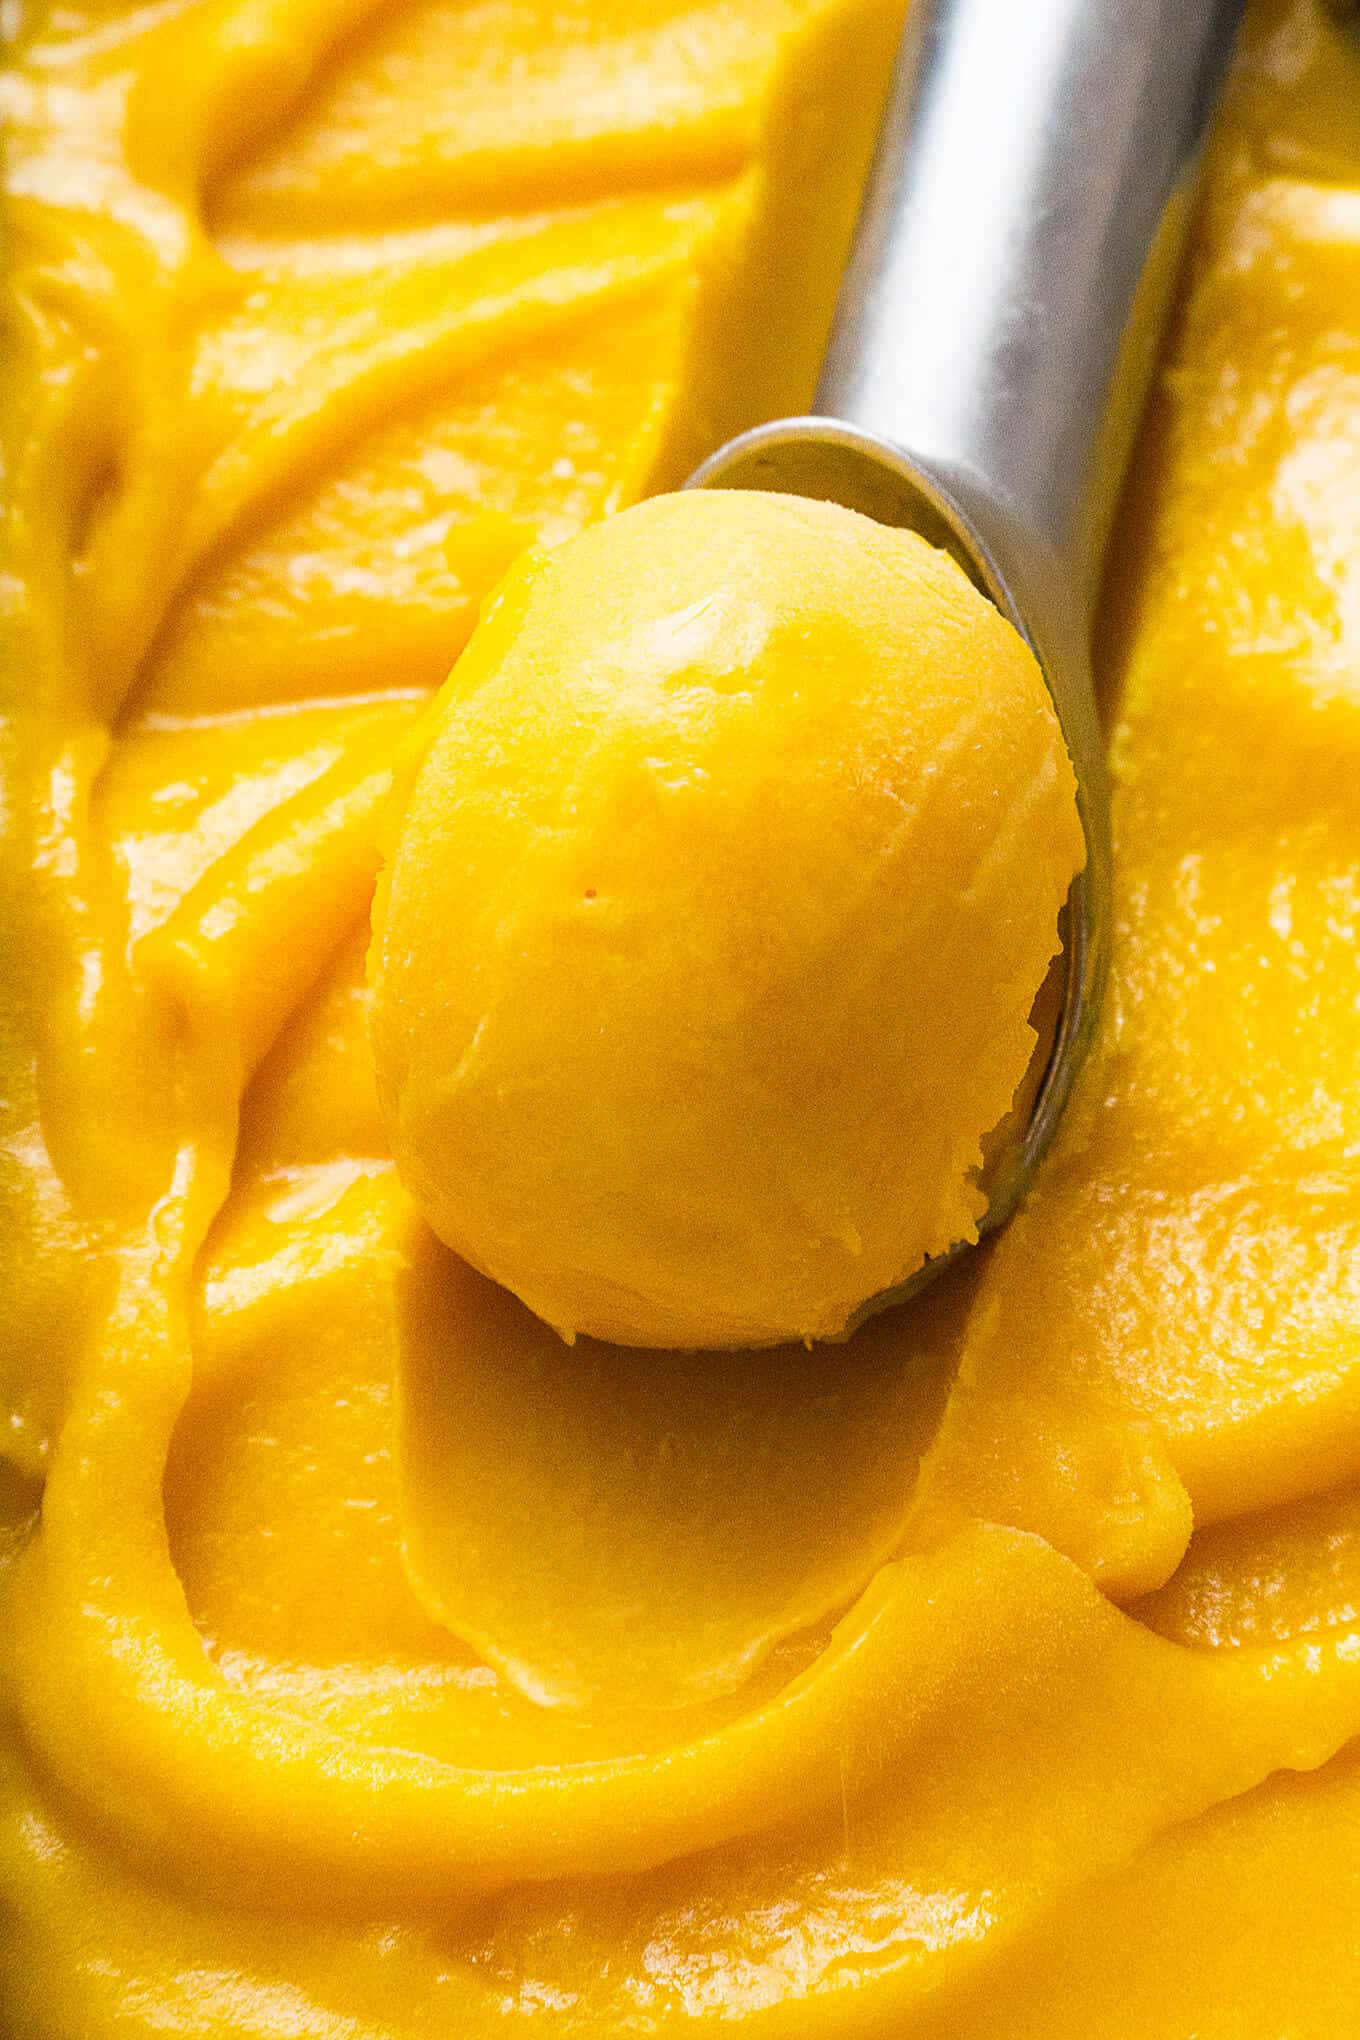 An ice cream scoop full of mango ice cream on a container of it.